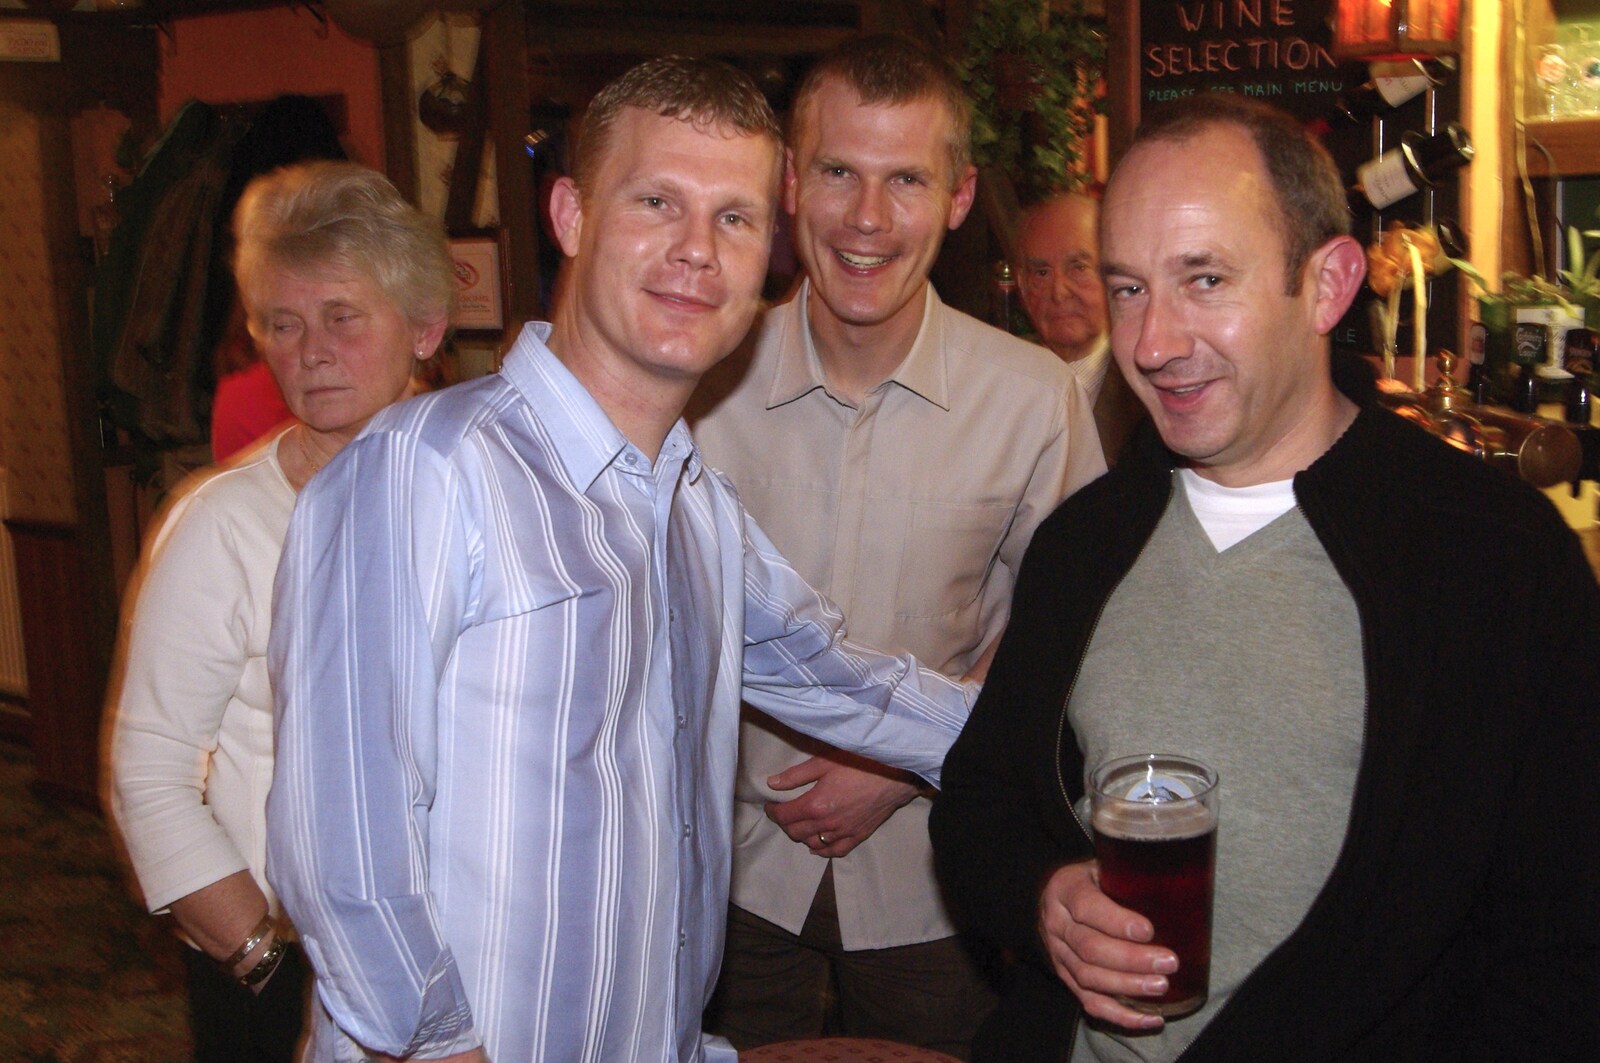 The Swan's 25th Anniversary, Brome, Suffolk - 14th November 2008: Mikey, Andy and DH